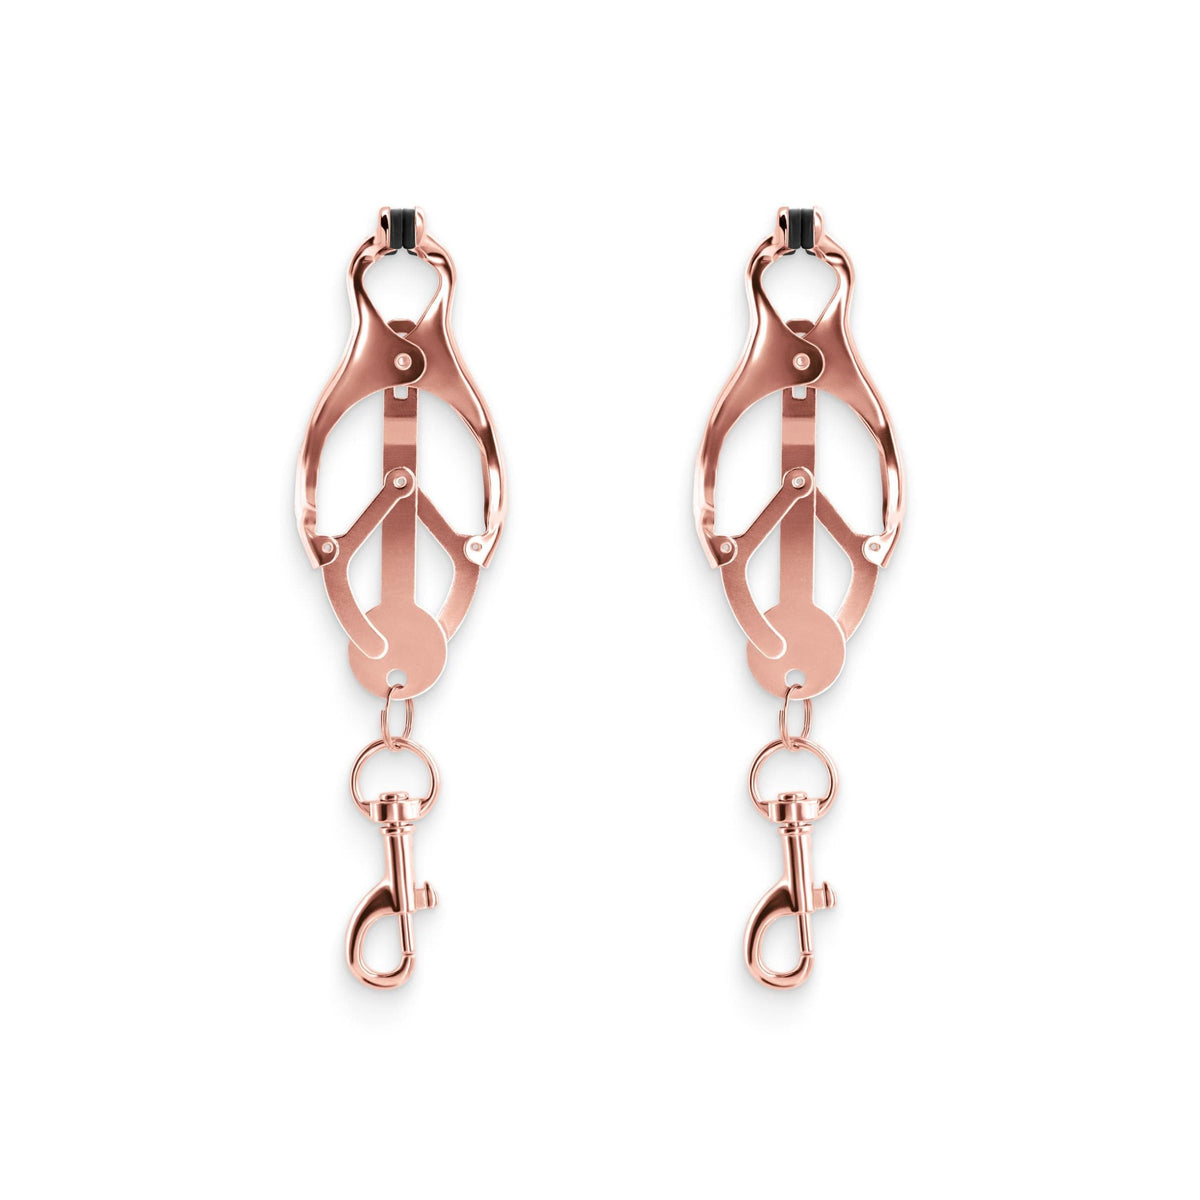 bound nipple clamps c3 rose gold